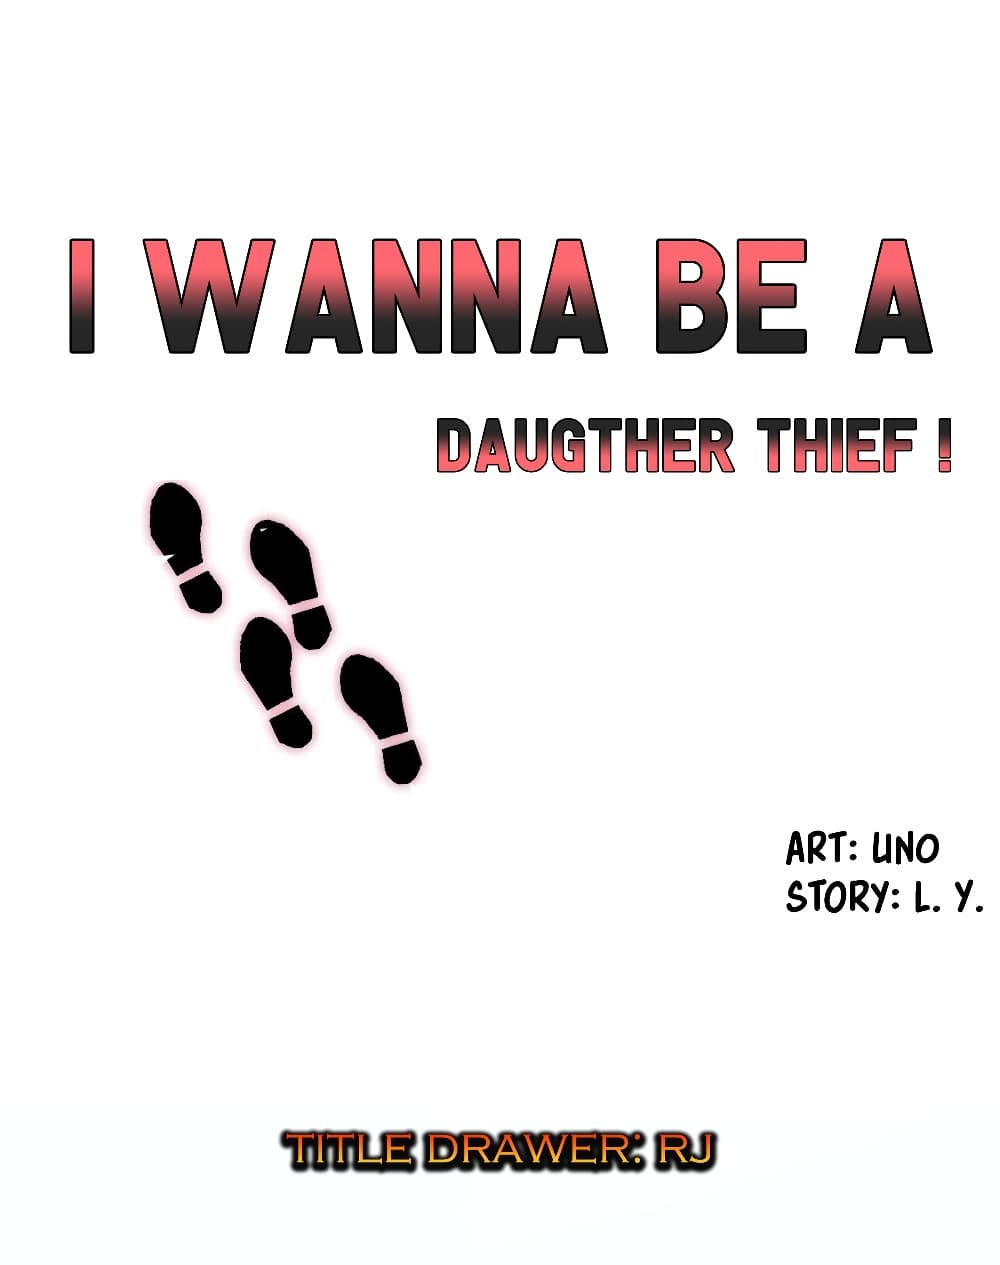 I Want To Become A Daughter Thief